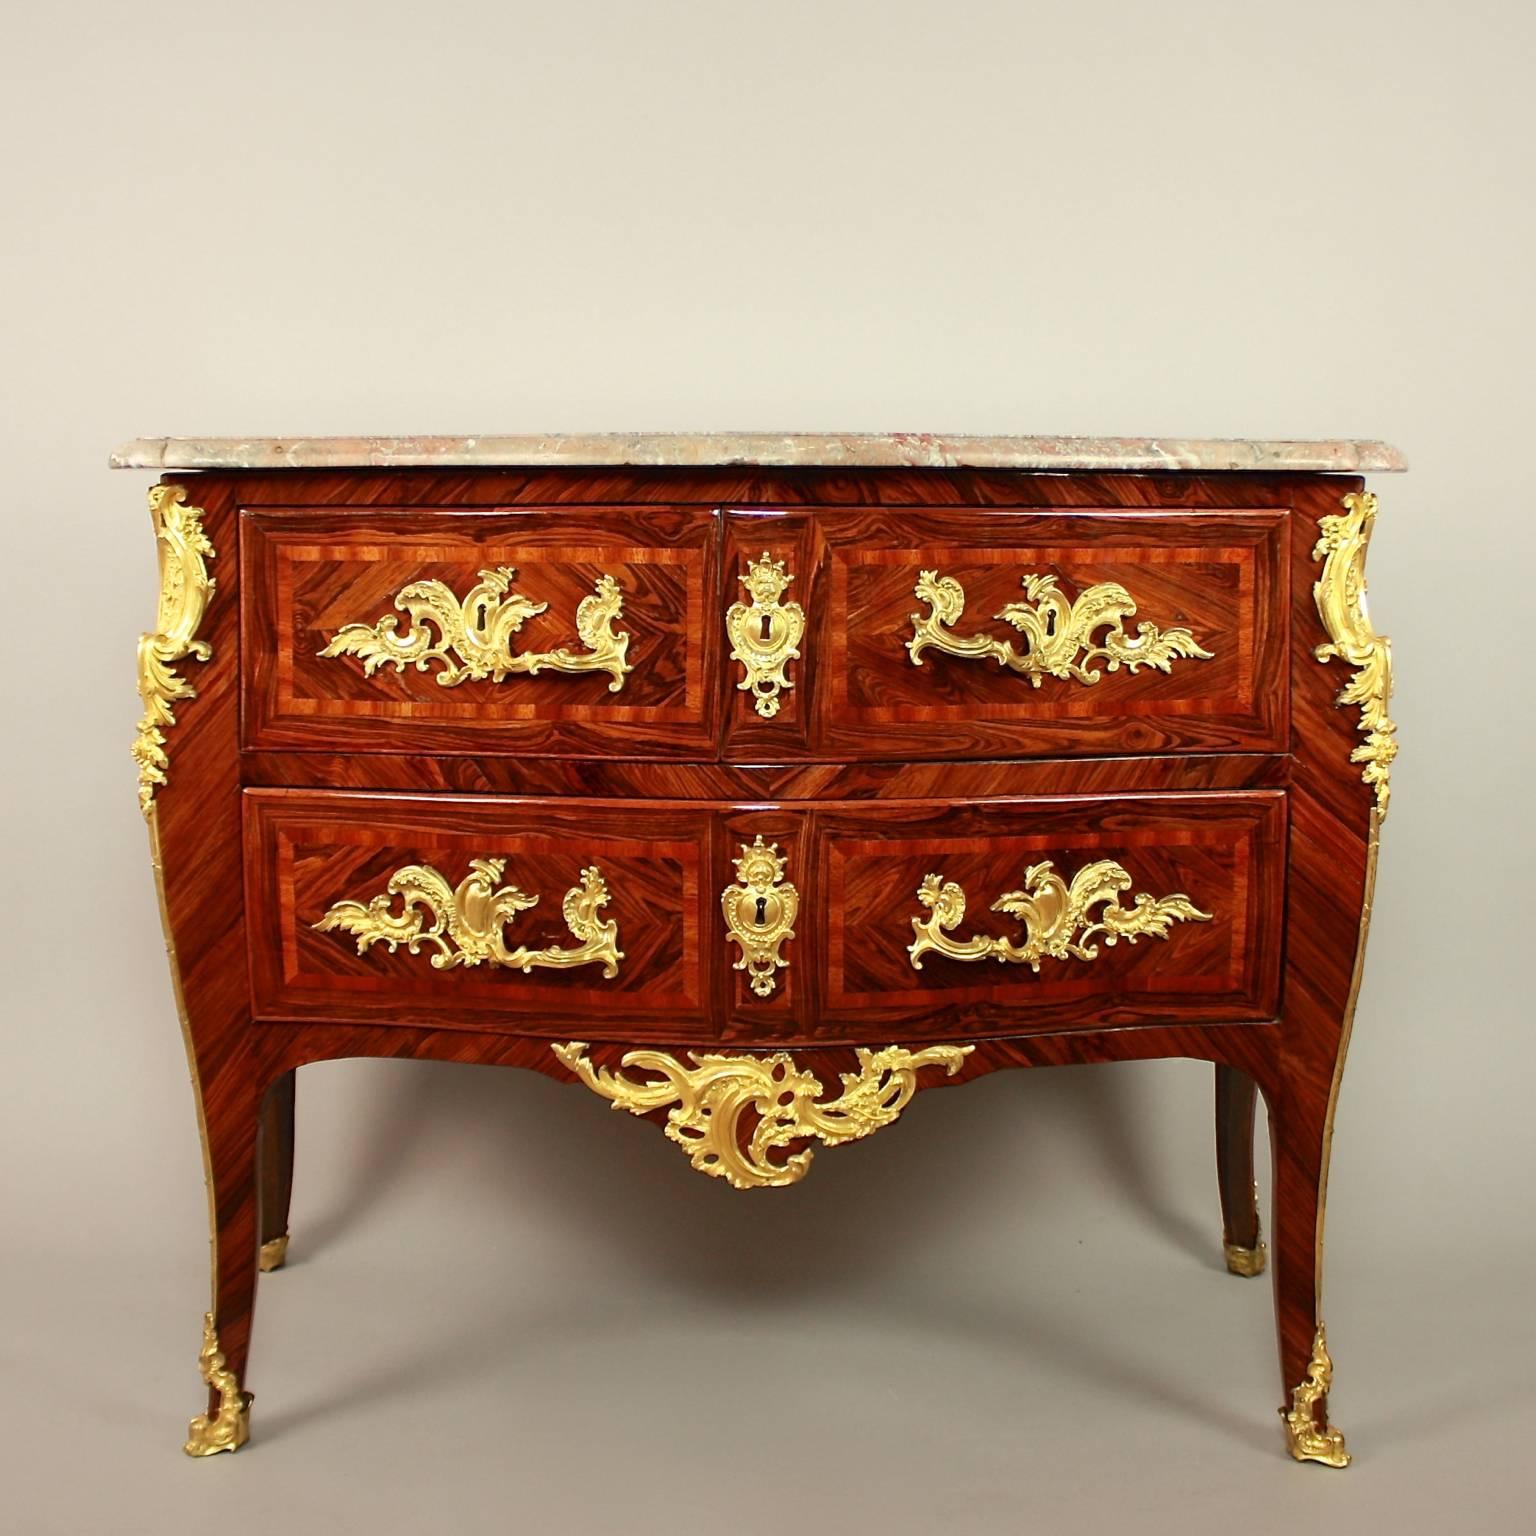 French Louis XV Gilt Bronze-Mounted Kingwood Commode, Stamped Rubestuck, circa 1765